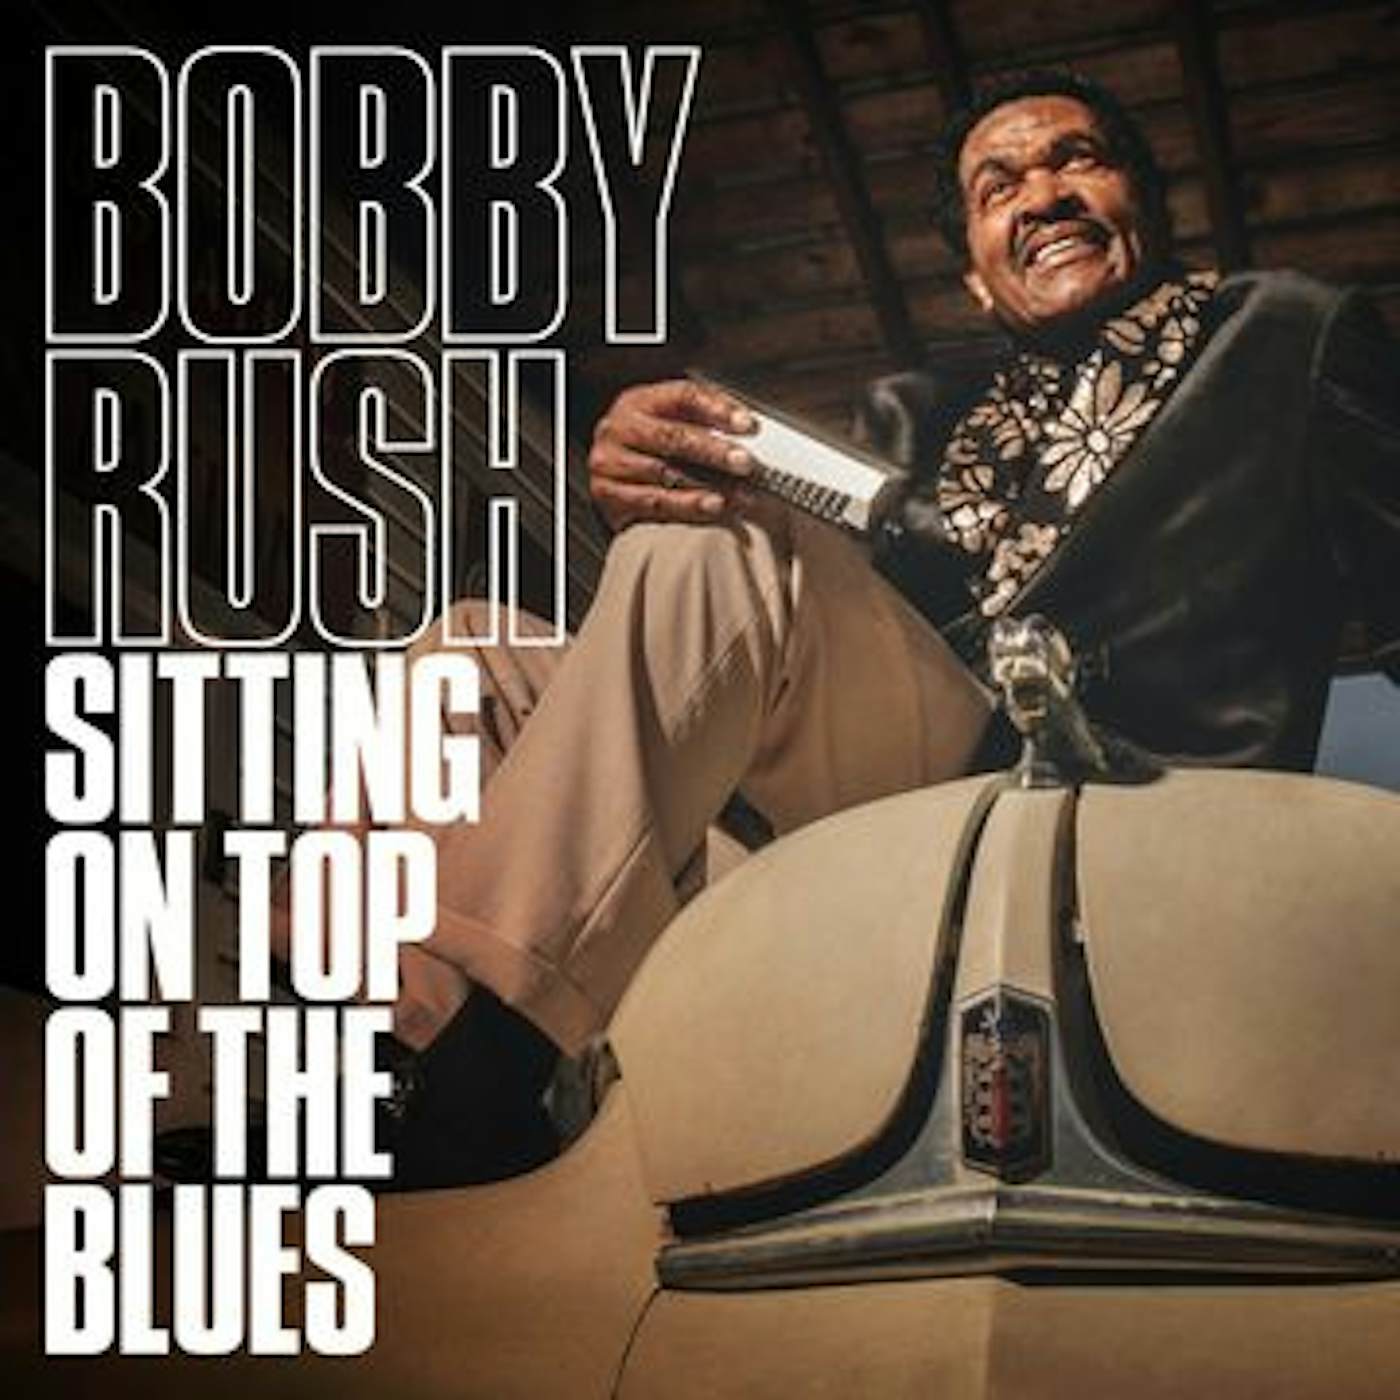 Bobby Rush Sitting On Top Of The Blues Vinyl Record